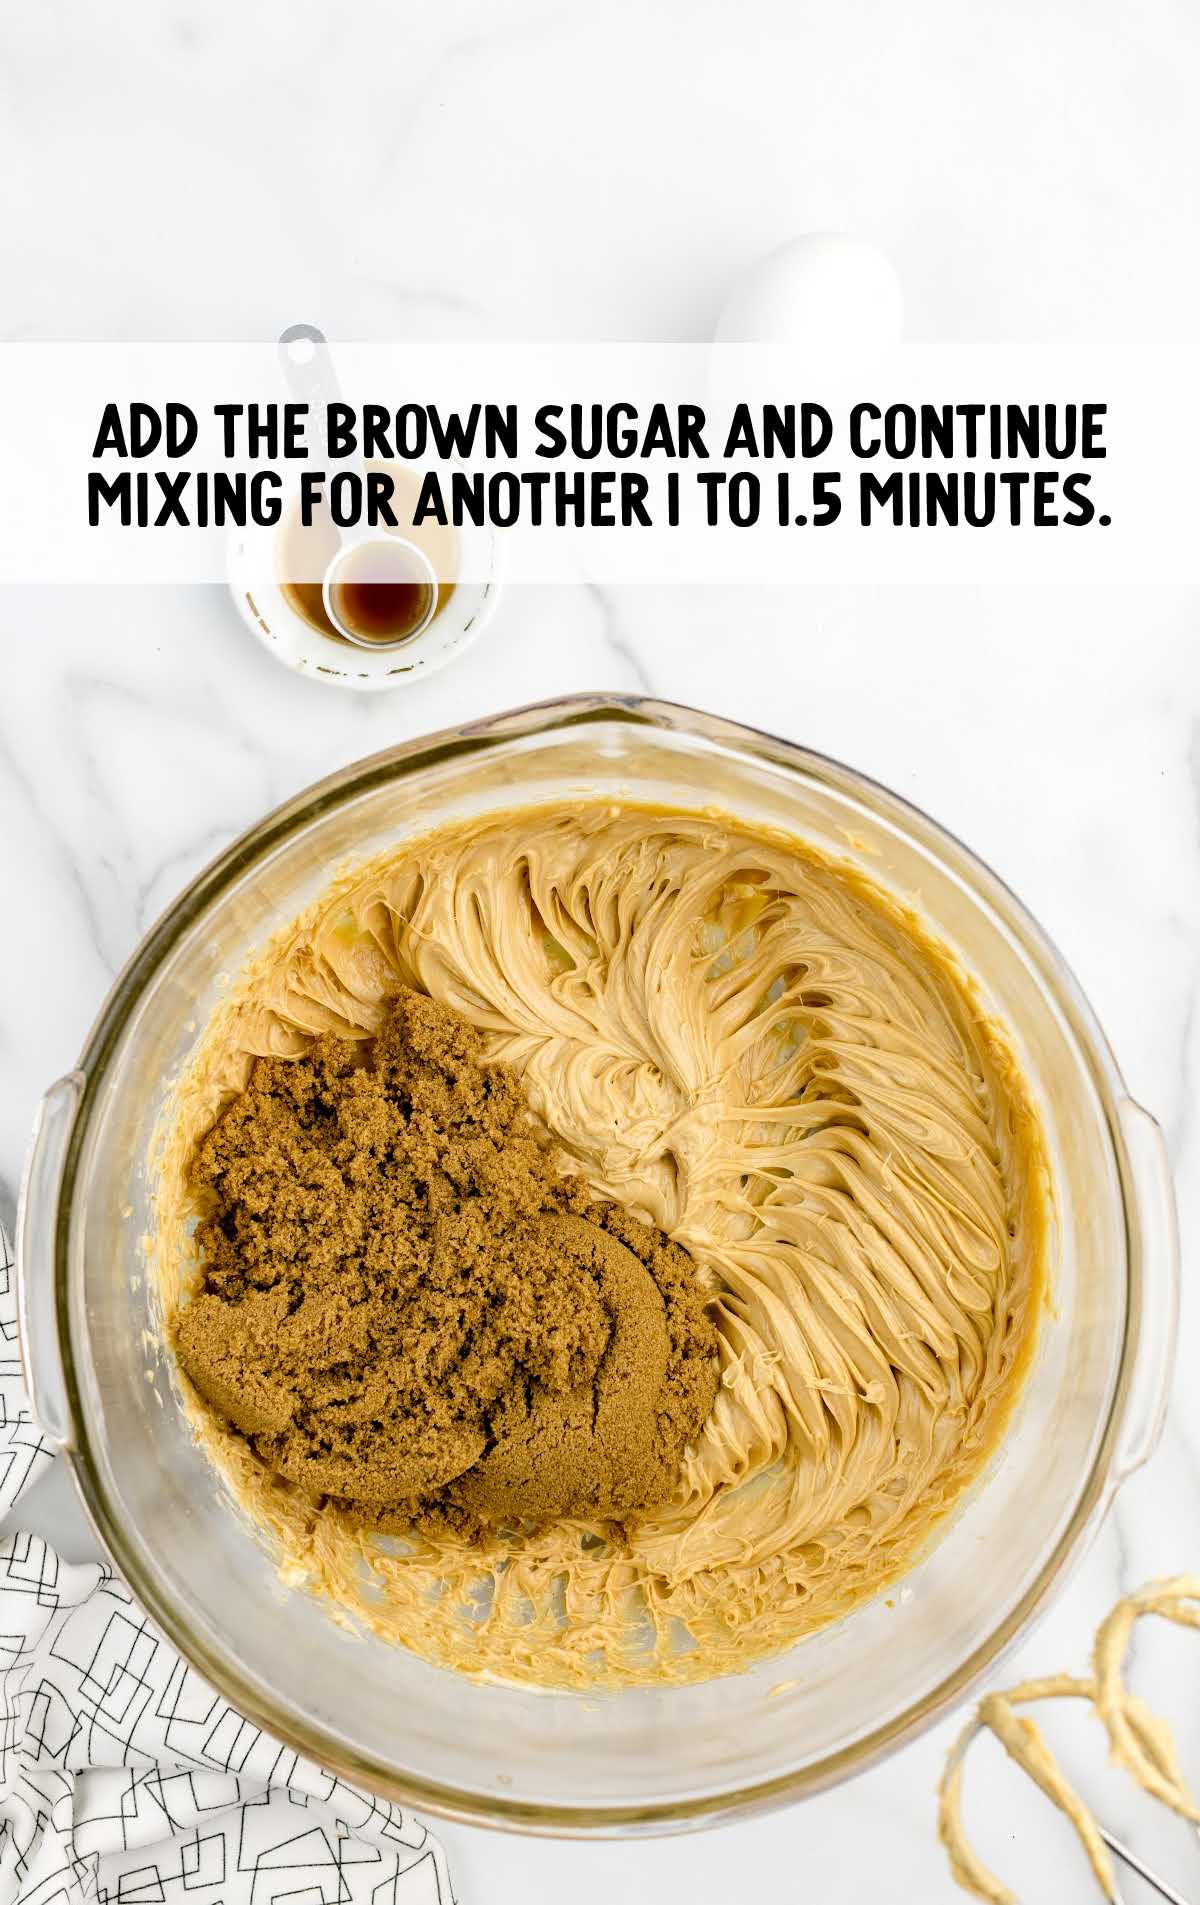 brown sugar added to the ingredients in the bowl